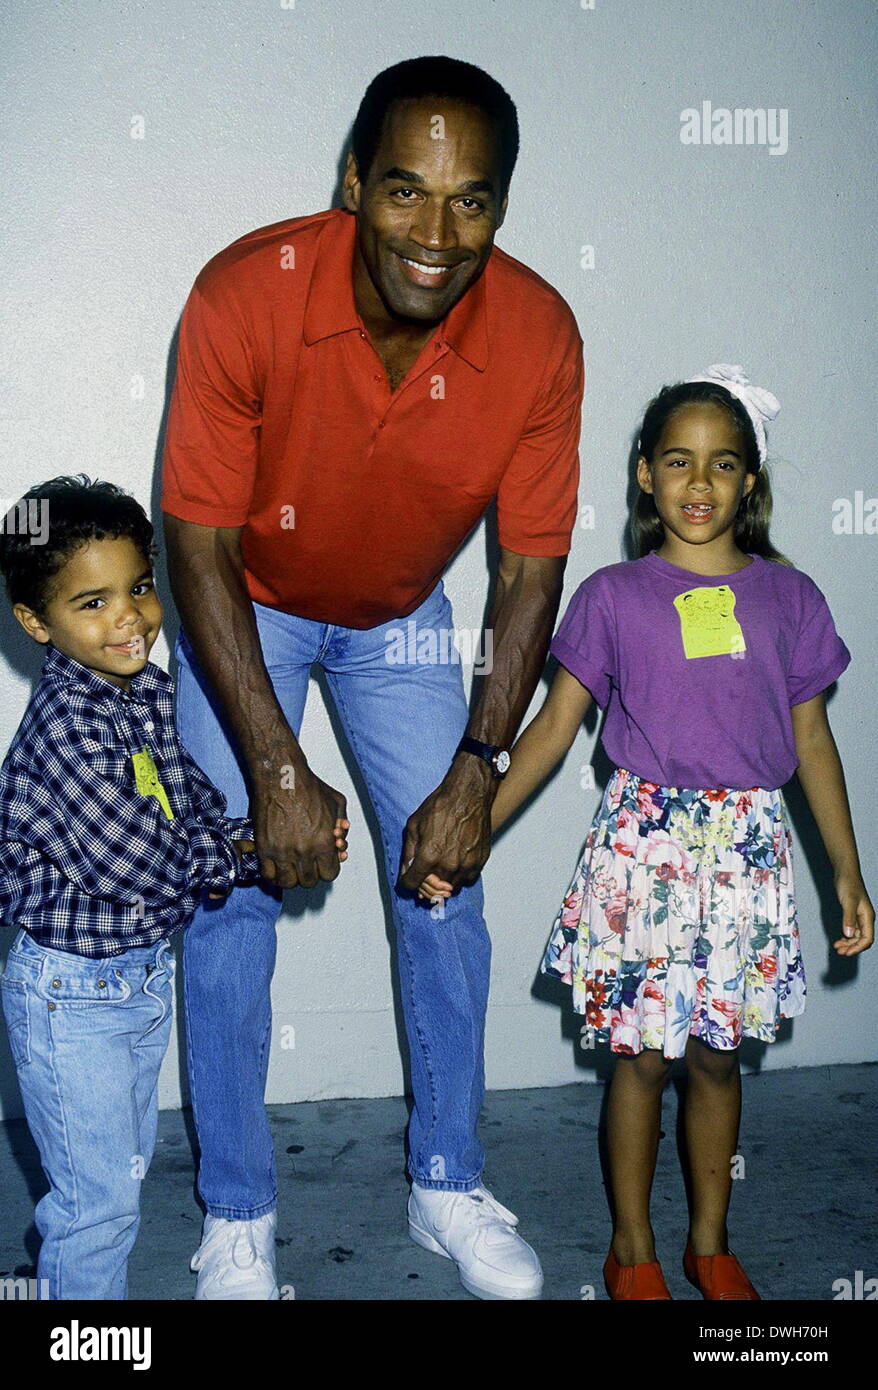 Feb 3, 1994 - Los Angeles, California, U.S. - O.J. SIMPSON with Children JUSTIN RYAN SIMPSON and SYDNEY BROOKE SIMPSON. Wife Nicole Brown and her friend R. Goldman were murdered on June 12, 1994 and OJ Simpson was charged with their deaths and subsequently acquitted of all criminal charges in a controversial criminal trial. In the unanimous jury findings of a civil court case in February 1997, Simpson was found liable for the wrongful death of Goldman and stabbing of Brown. PICTURED: Exact Date Unknown c. early 1994. (Credit Image: © Castilla/Globe Photos/ZUMAPRESS.com) Stock Photo